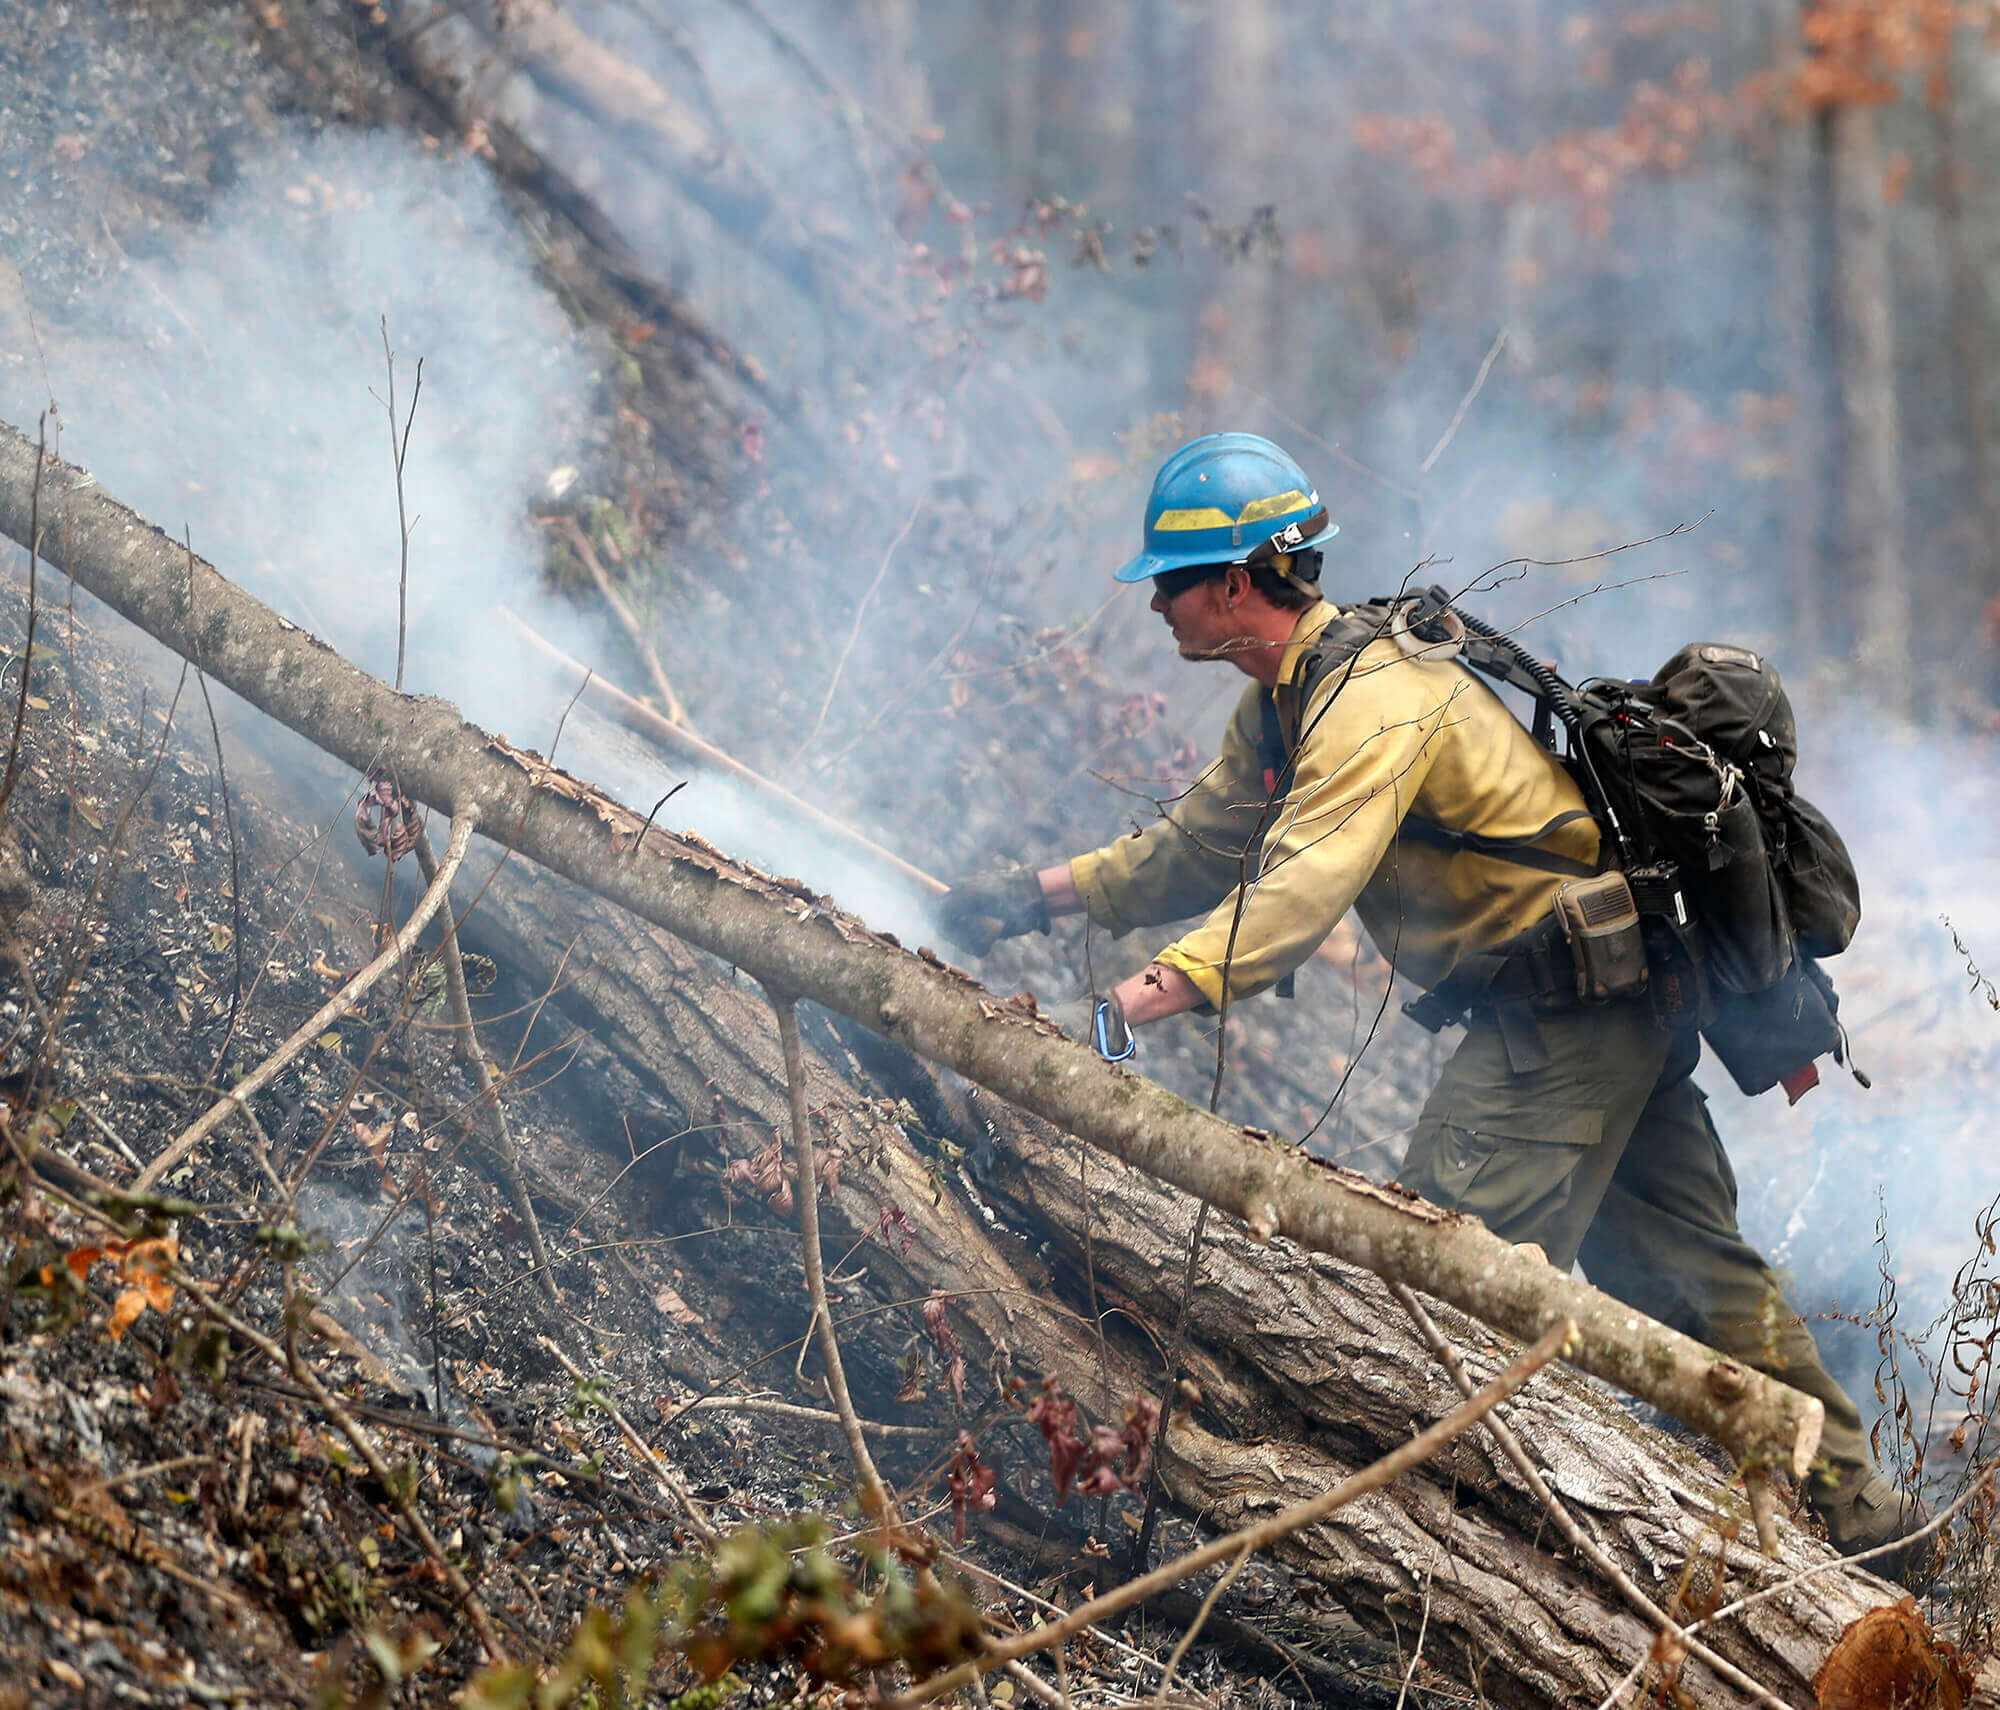 Image of smoky trees and firefighter